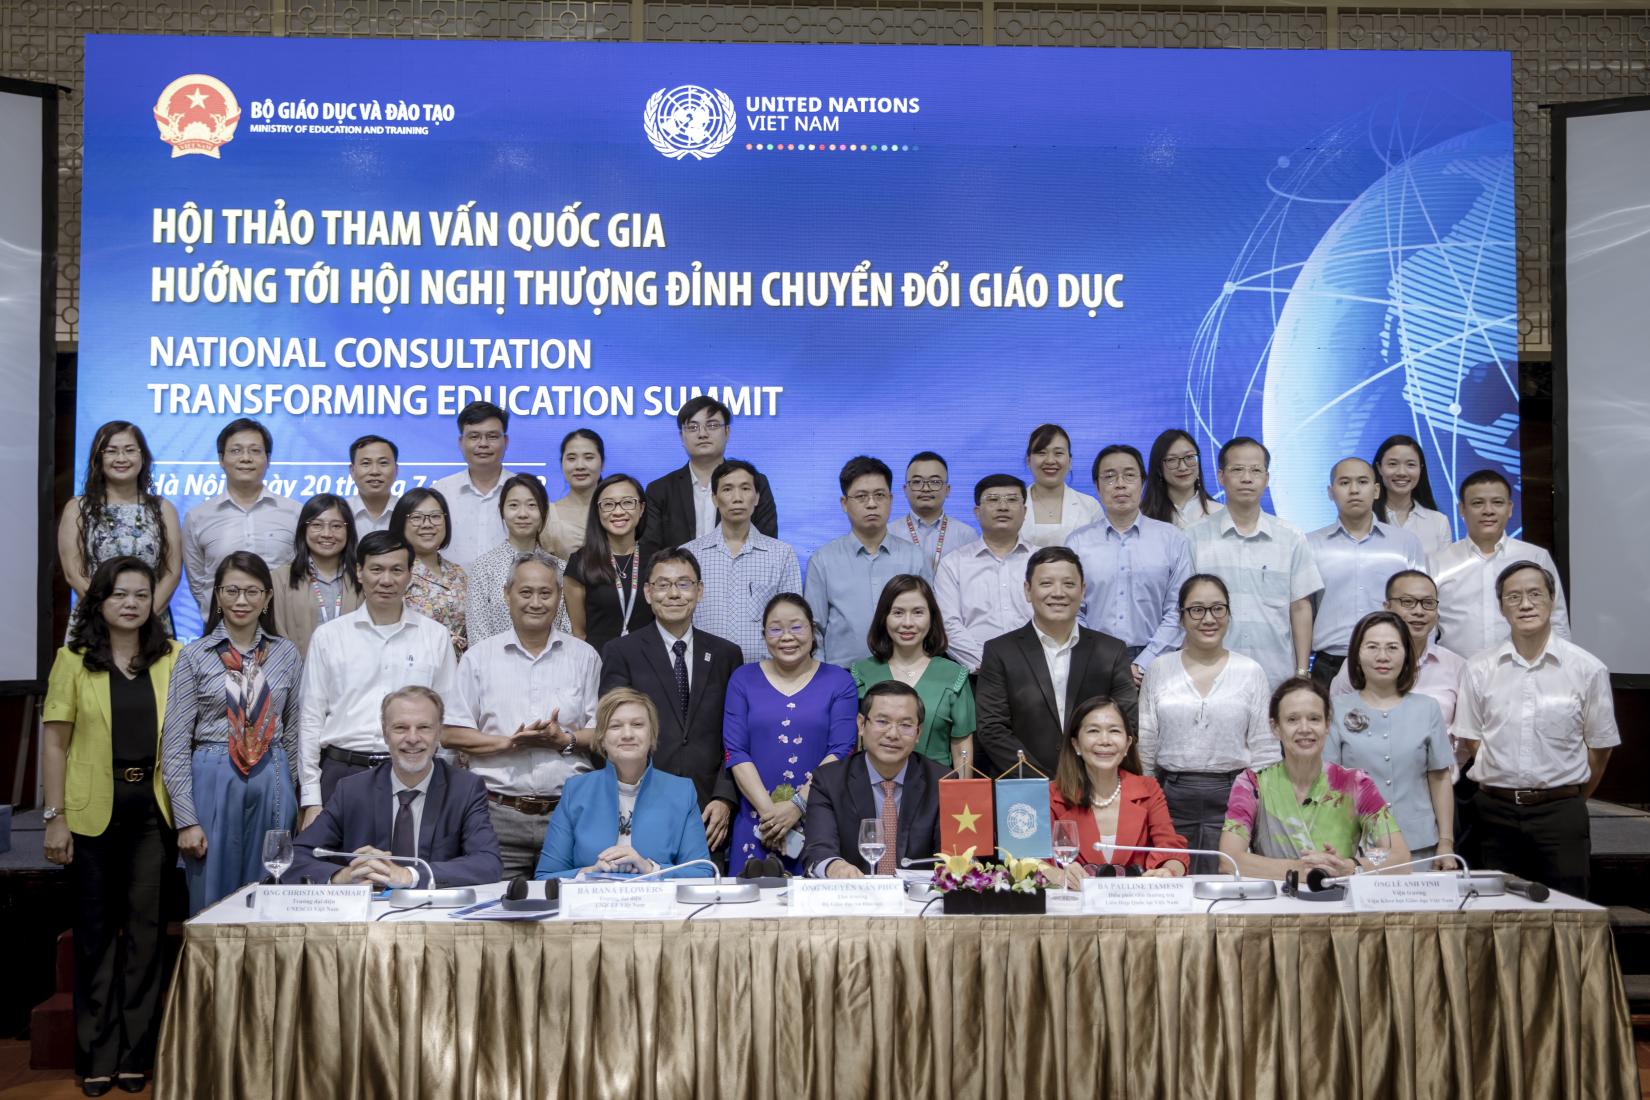 The Viet Nam National Consultation Workshop on Transforming Education